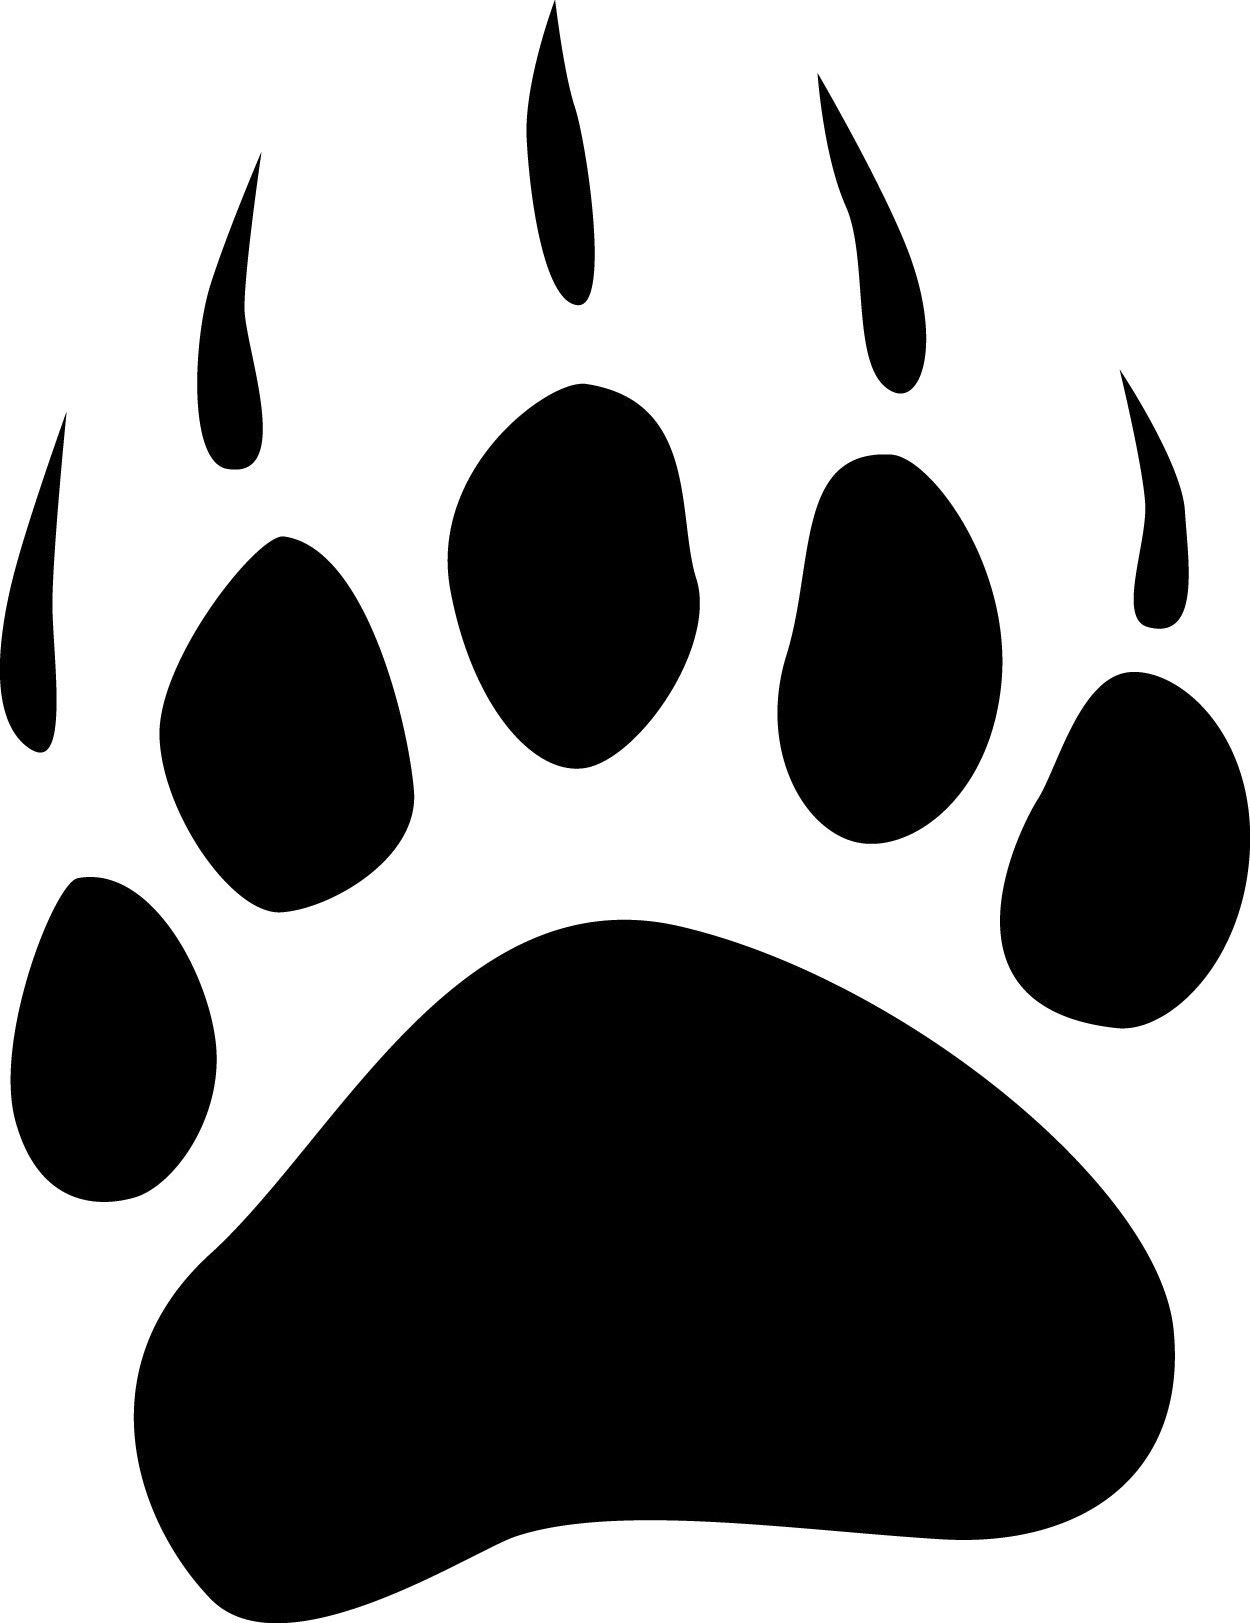 Bear claw grizzly bear paw print clipart free images 3